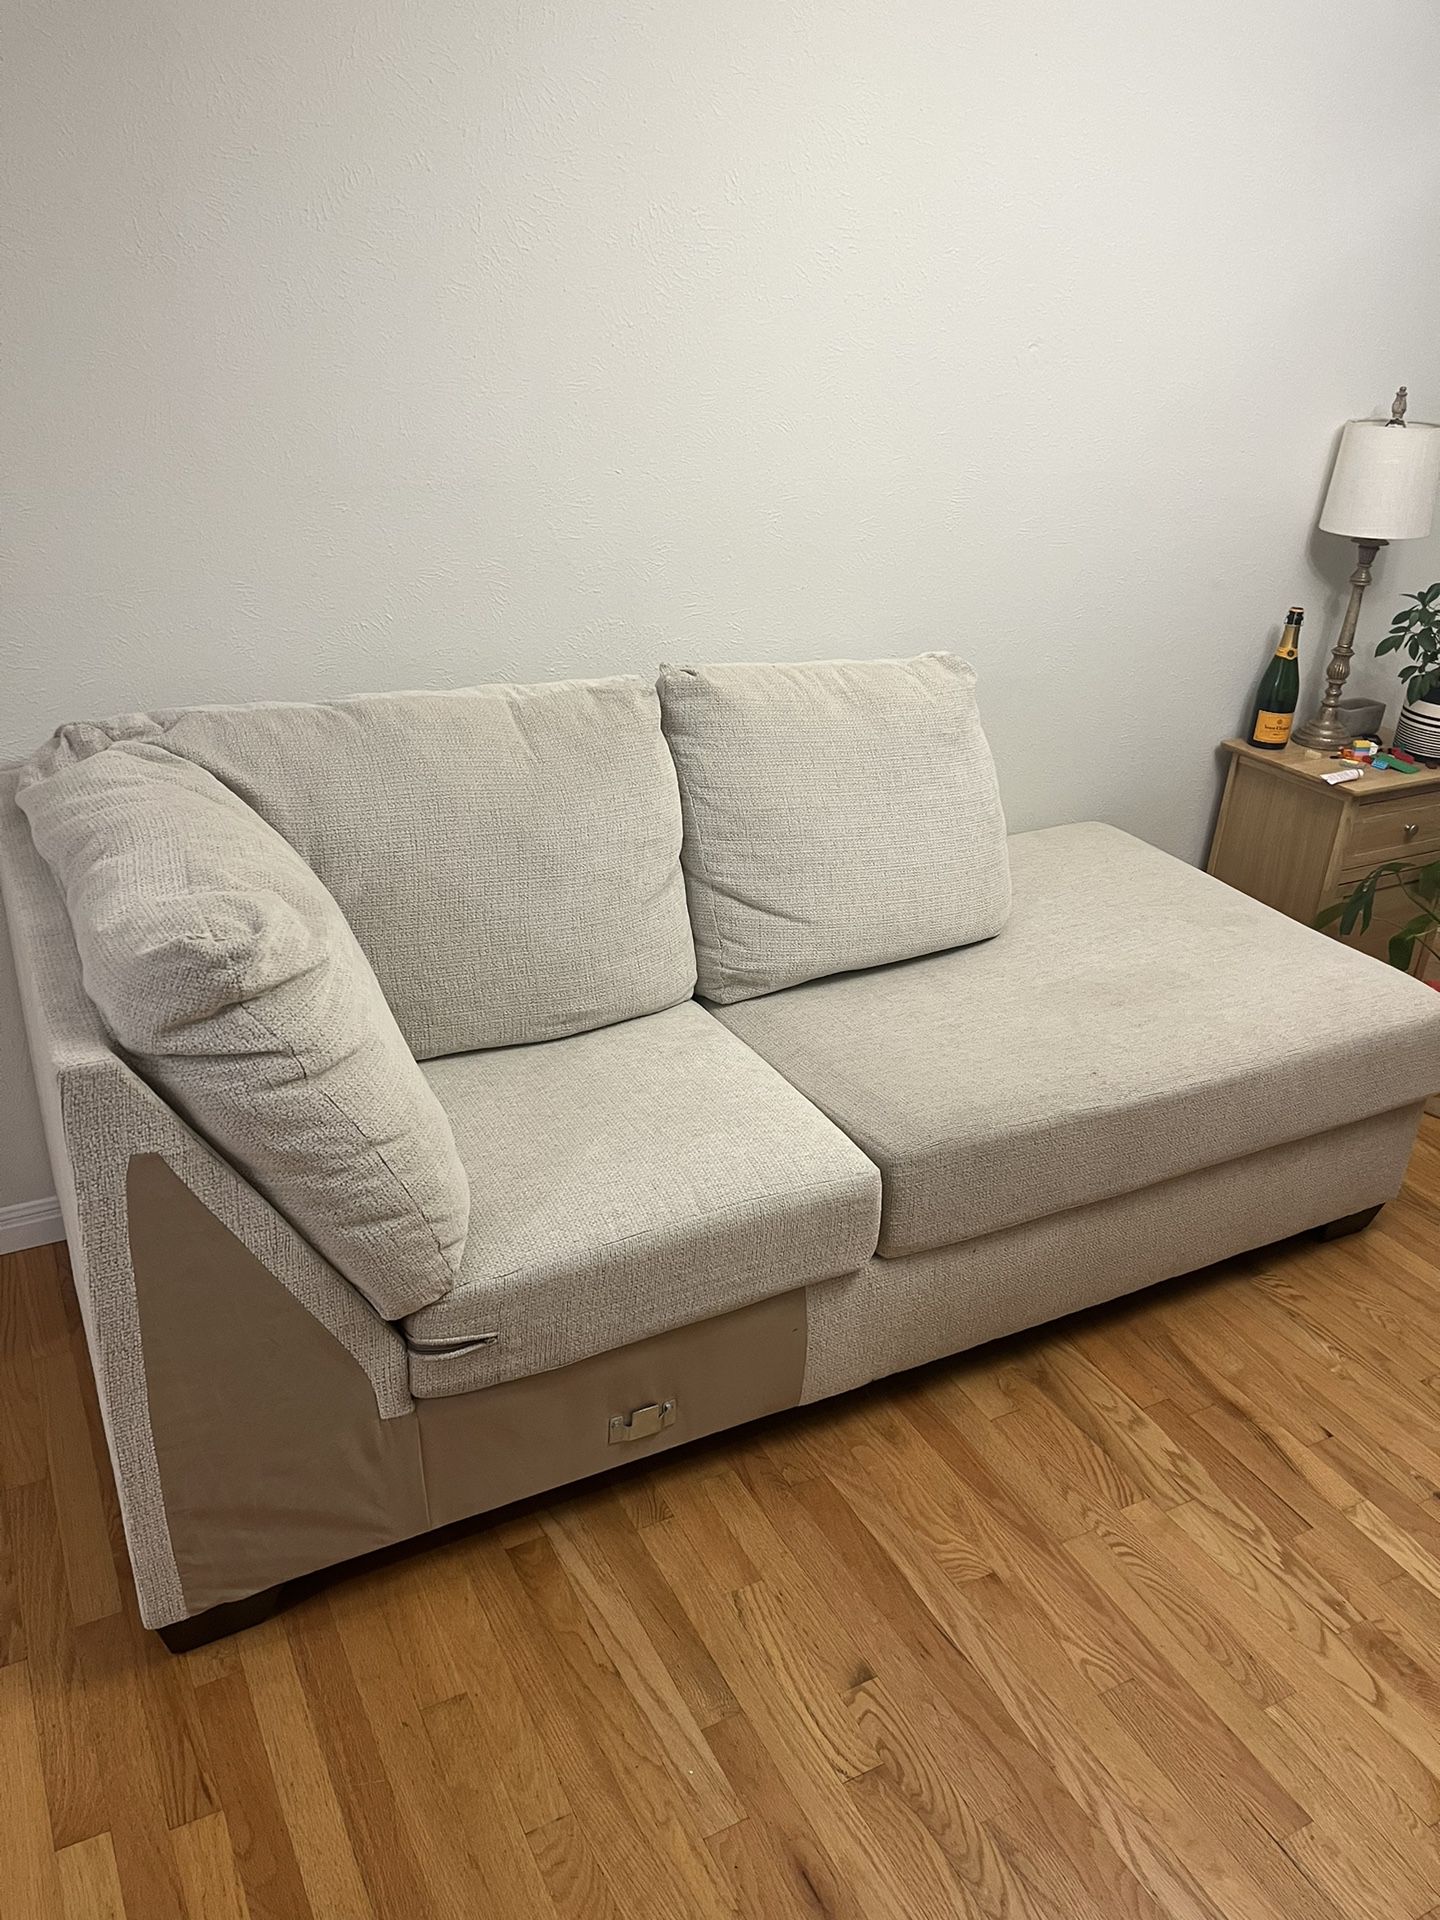 Couch - Partial U Shaped Piece